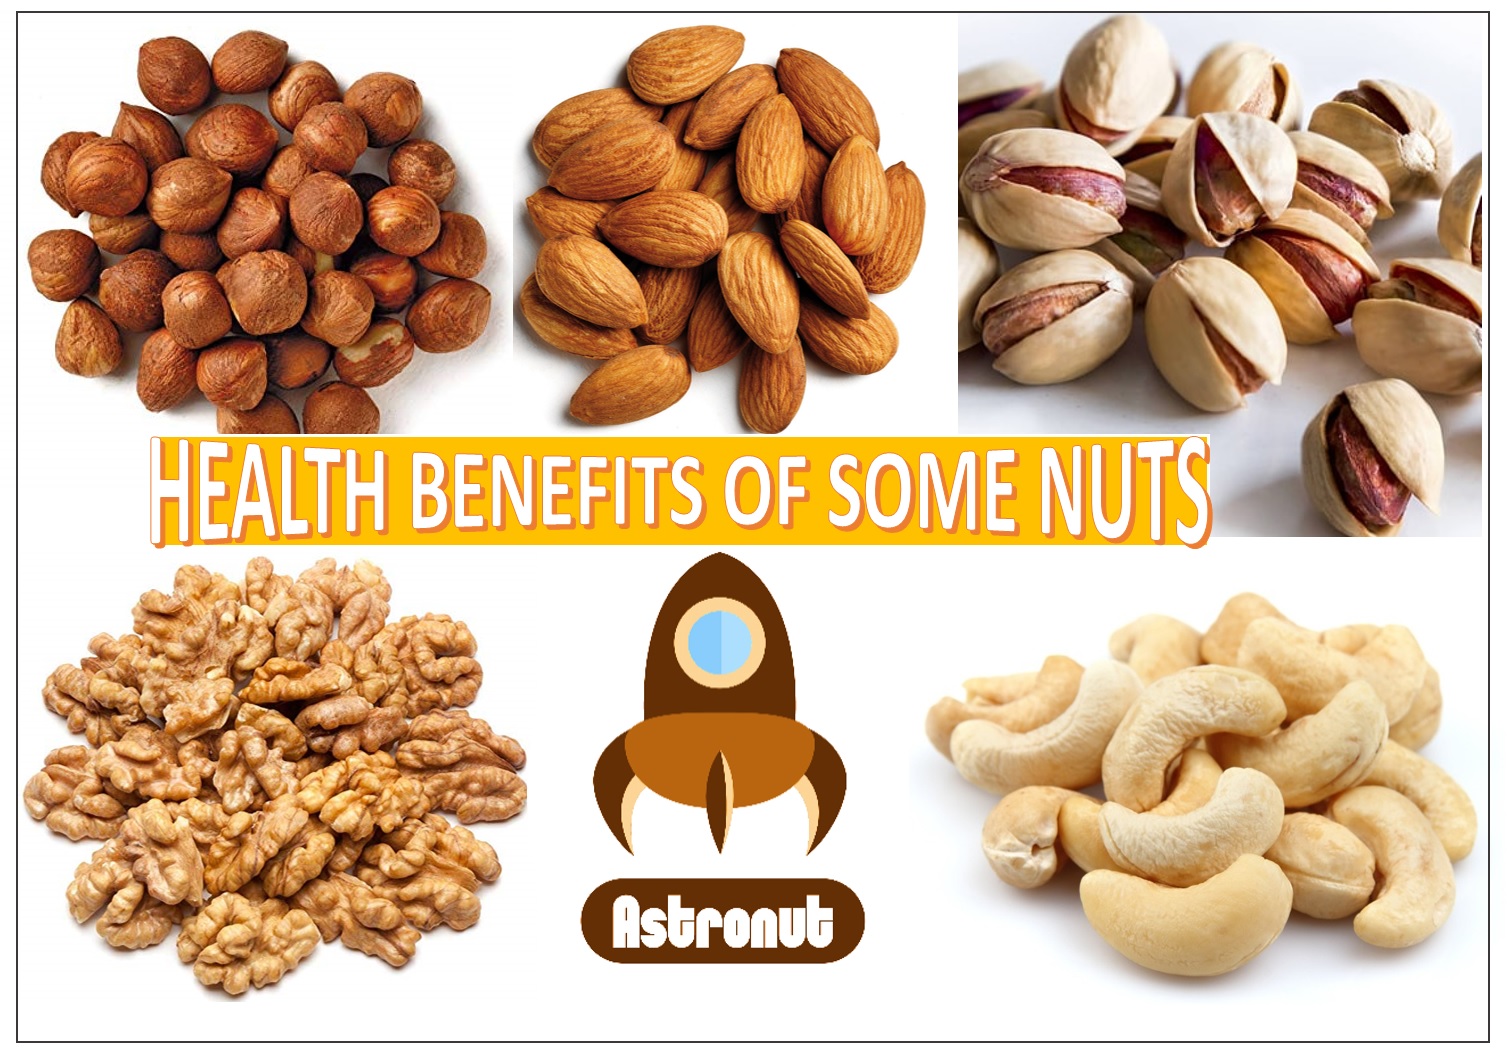 Health Benefits of Some Nuts